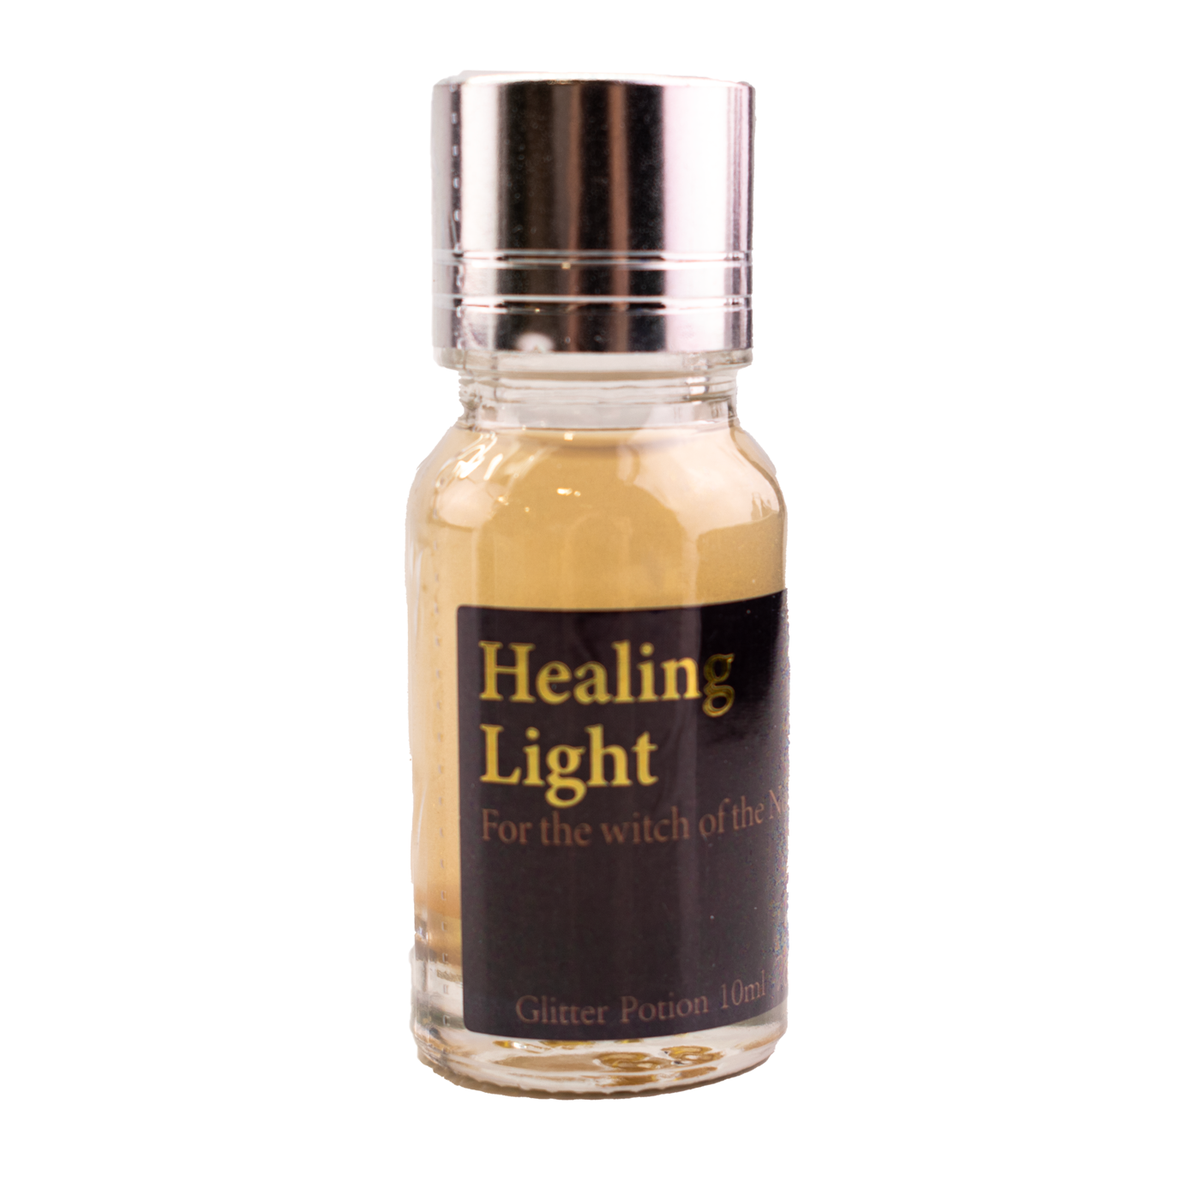 Wearingeul - Becoming Witch - Glitter Potion - Healing Light